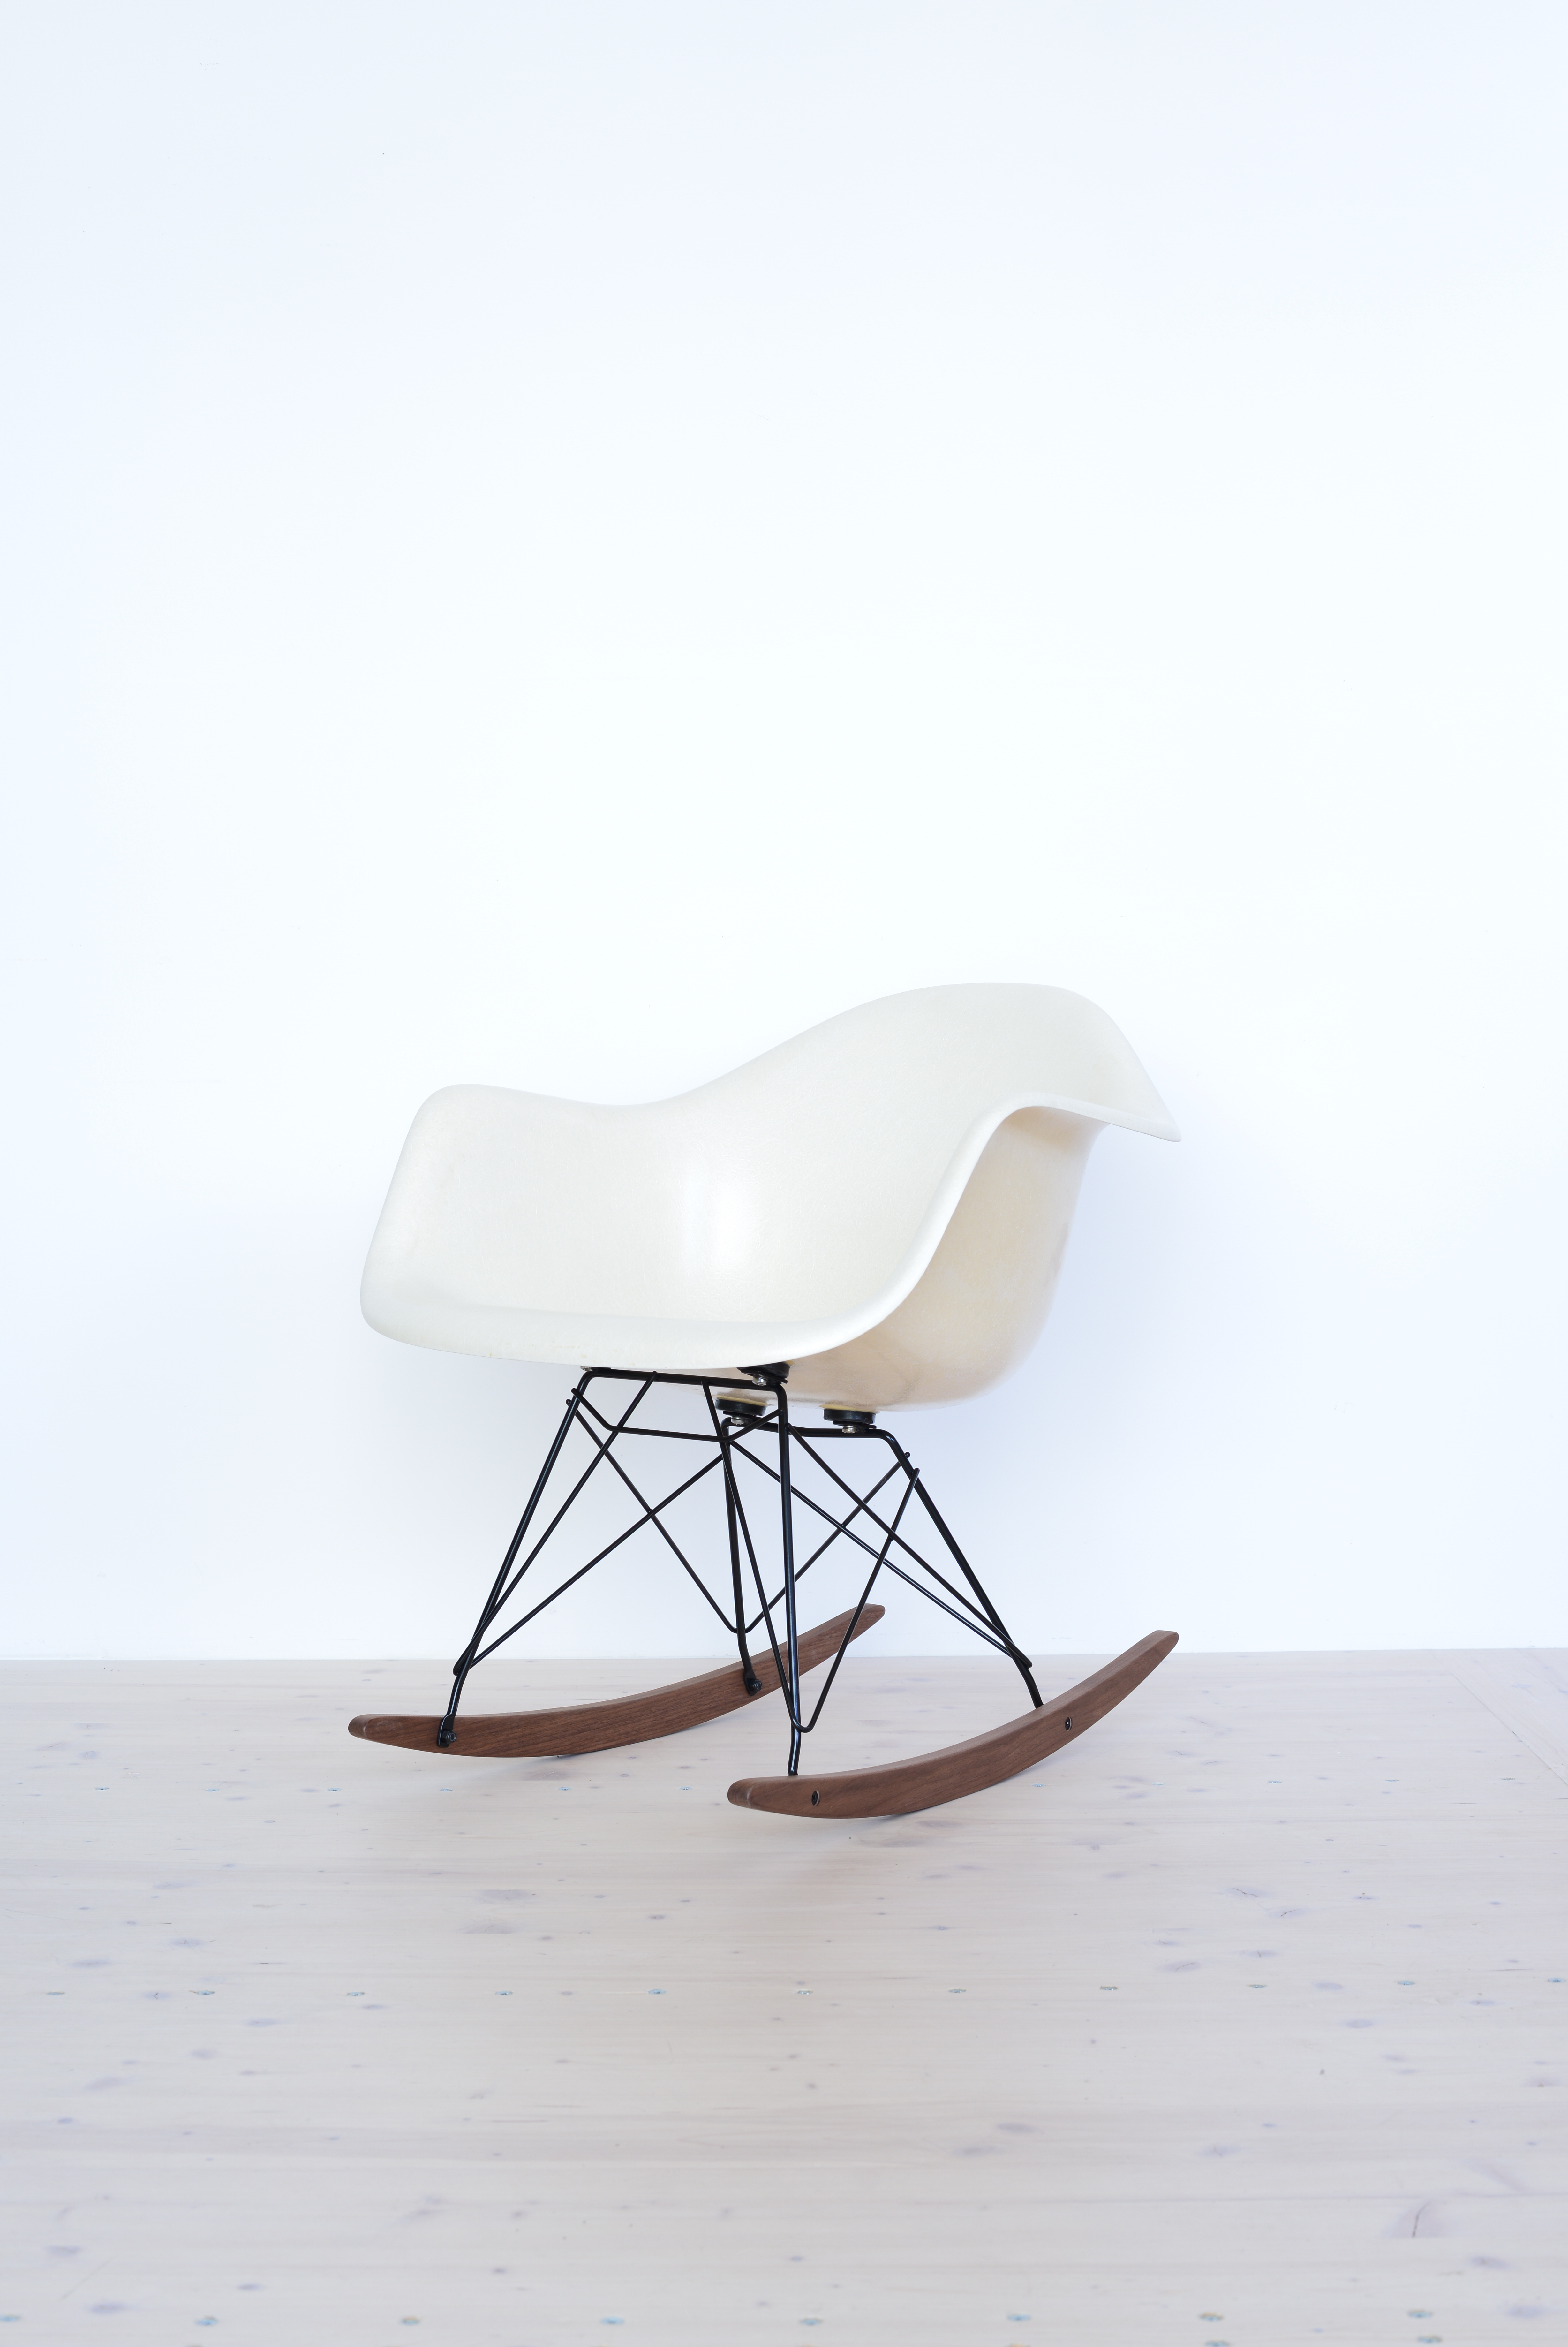 Eames Fiberglass Armchair in Parchment with Rocking Base heyday möbel